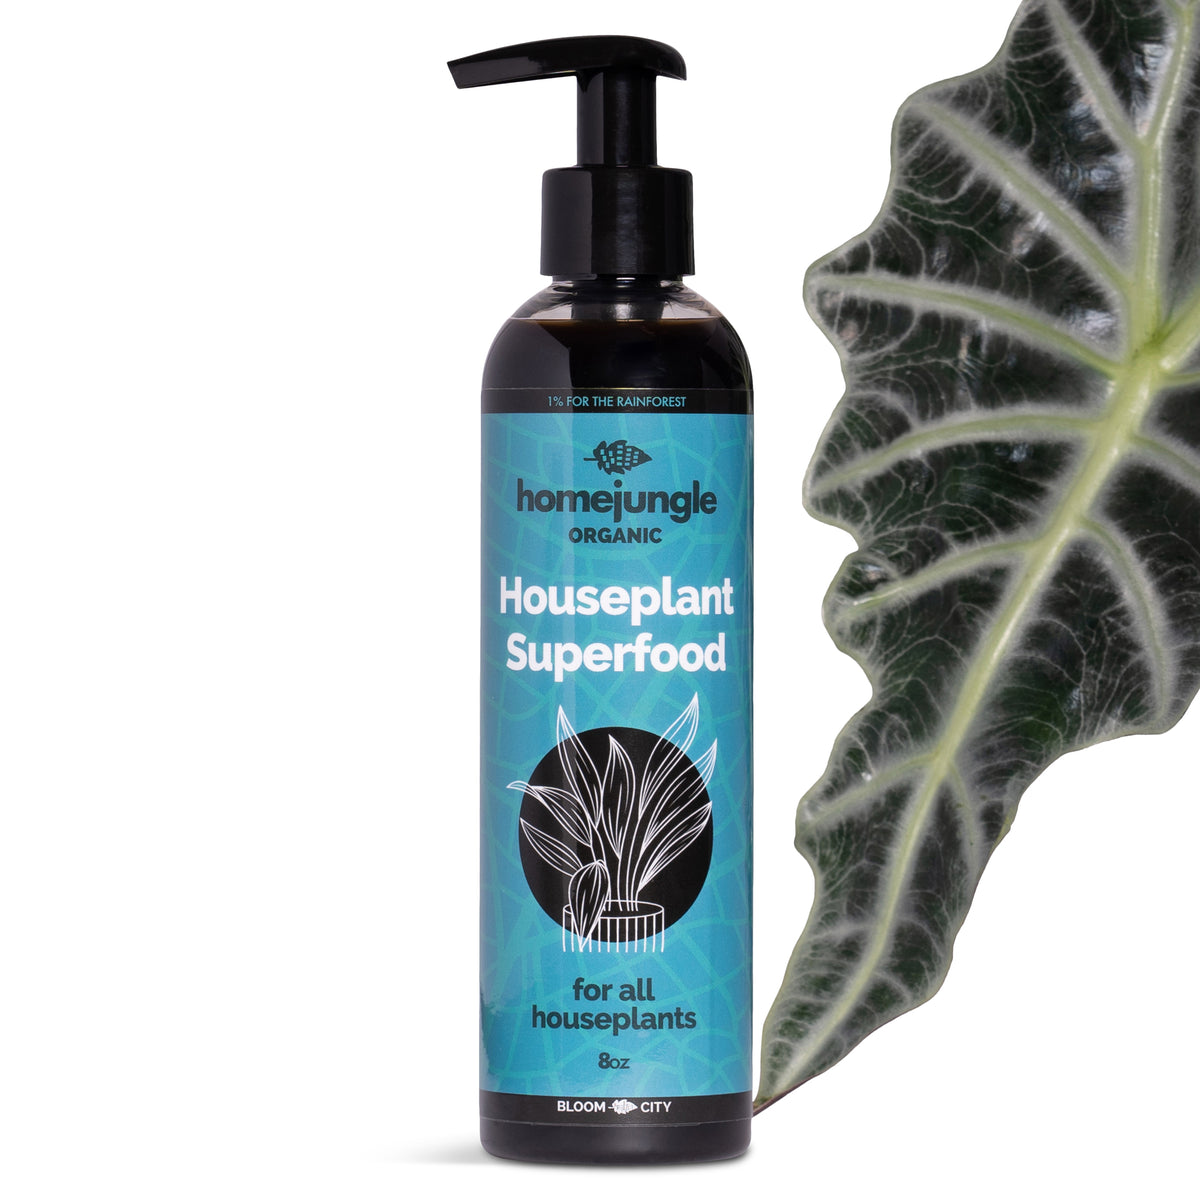 Superfood&lt;br&gt;for all houseplants